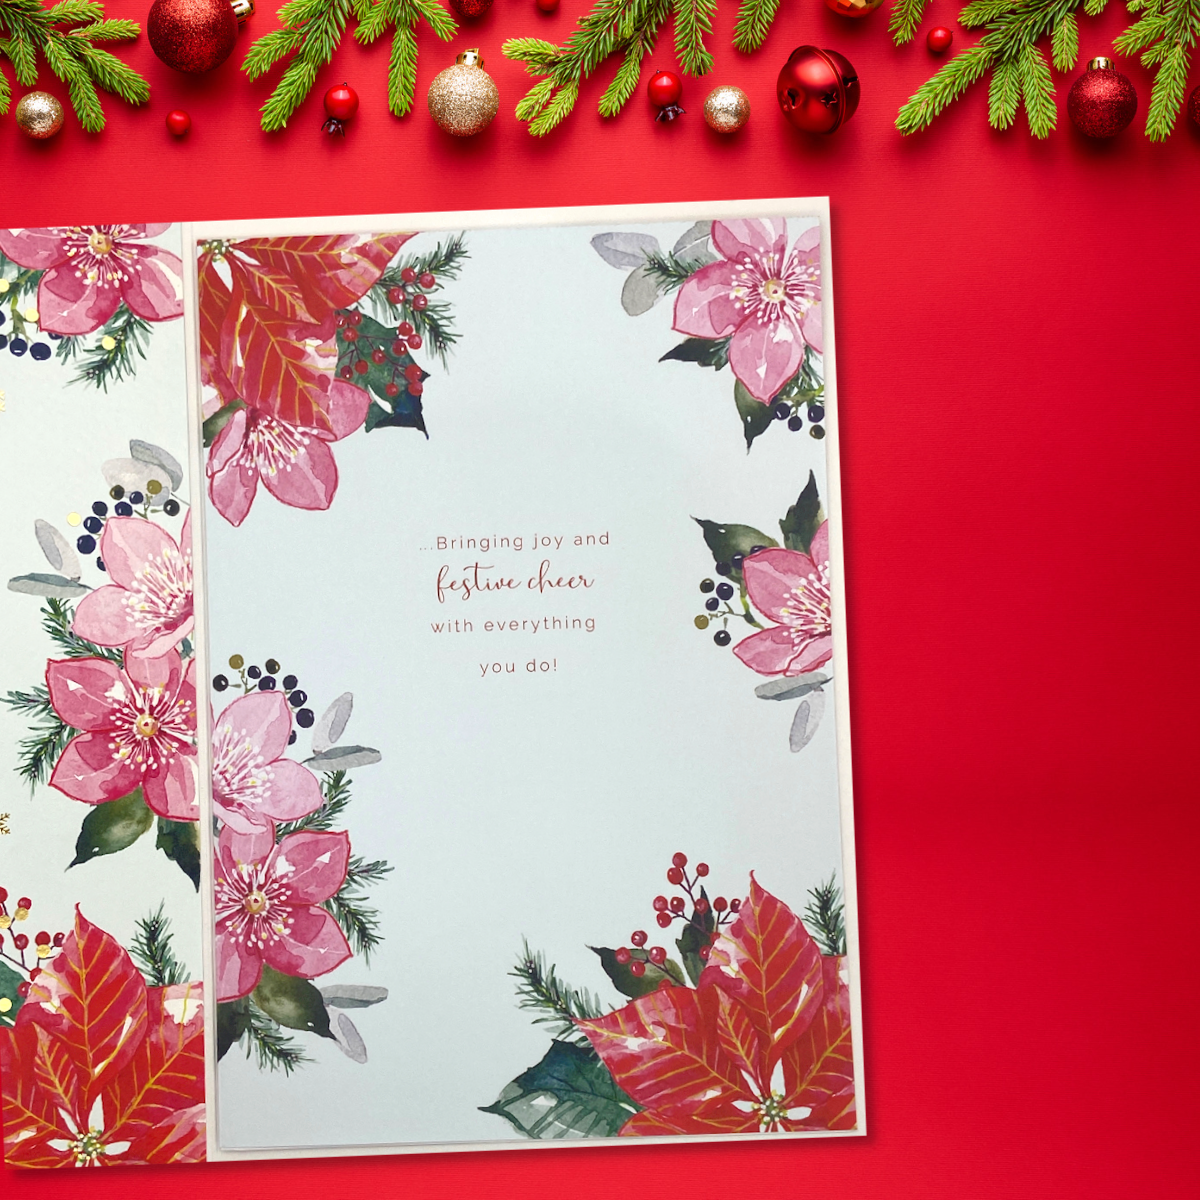 Inside image with large poinsettias and verse